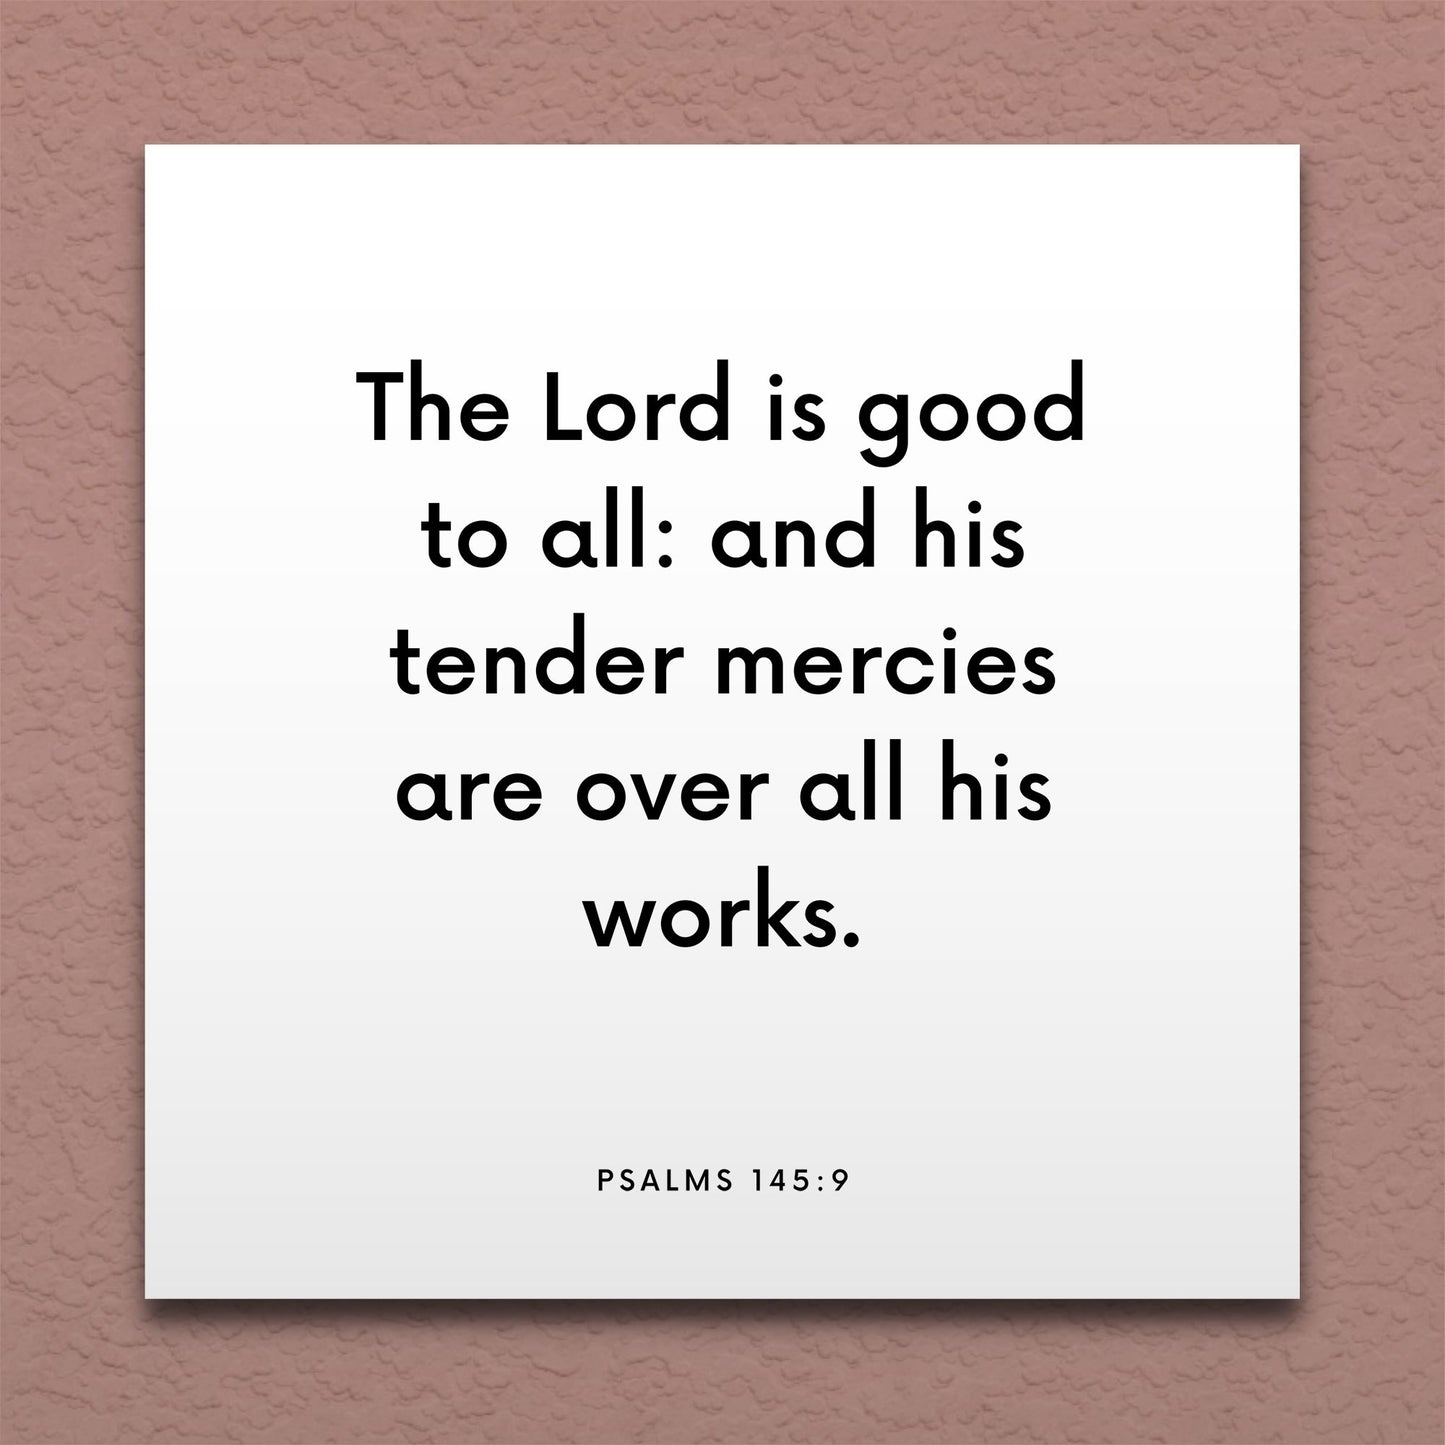 Wall-mounted scripture tile for Psalms 145:9 - "His tender mercies are over all his works"